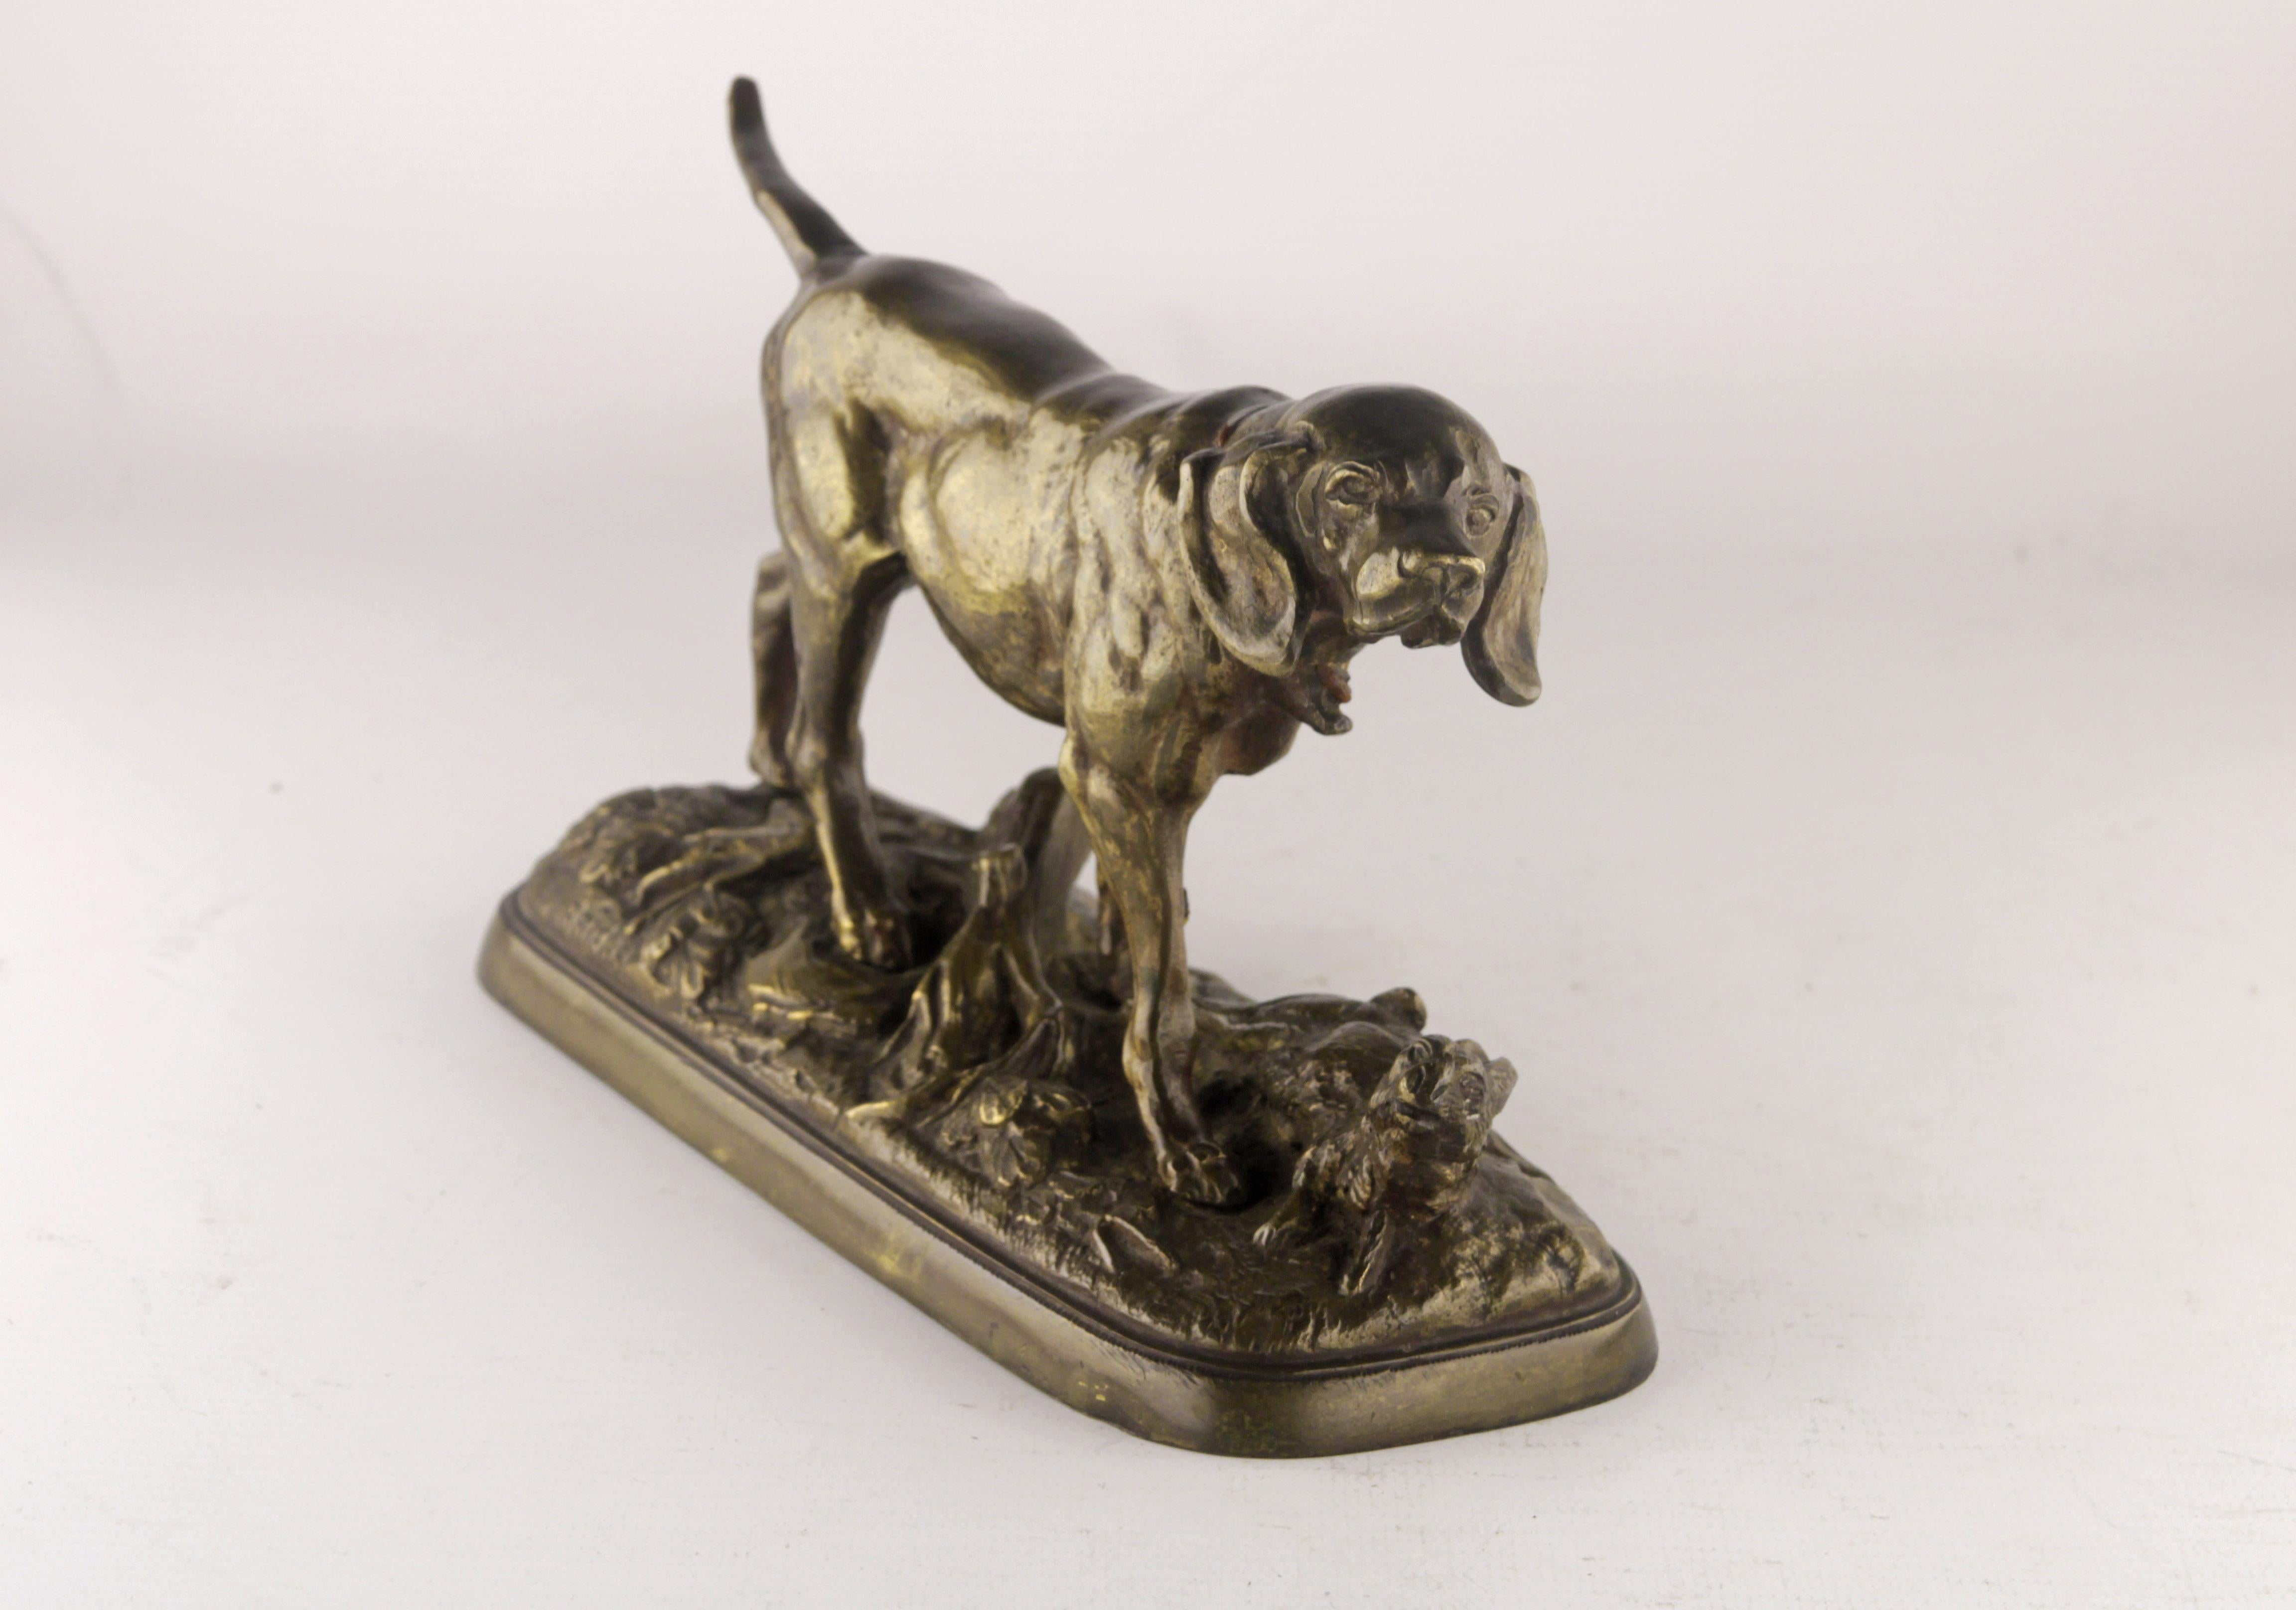 Bronze hunting dog and hare sculpture
Circa 1900 Origin France
Artist: Paul Edouard Delabriere
Signed on its base E. Delabrierre
Very good condition with natural wear on its patina
bronze material
Paul Edouard Delabrìere or Delabrierre was a French